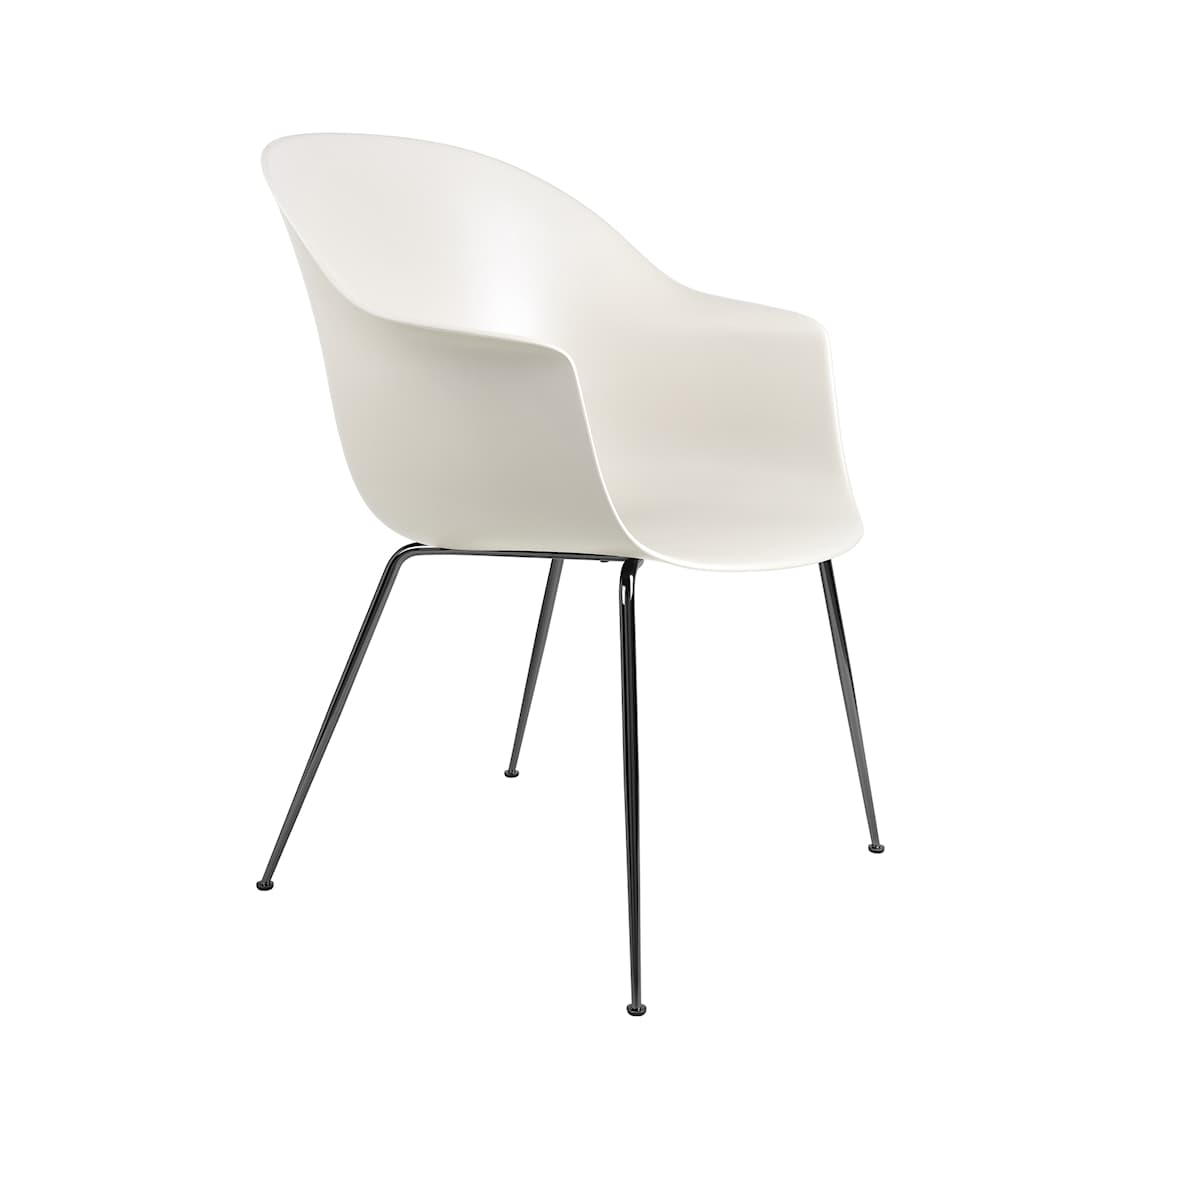 Bat Dining Chair Alabaster White - Un-upholstered